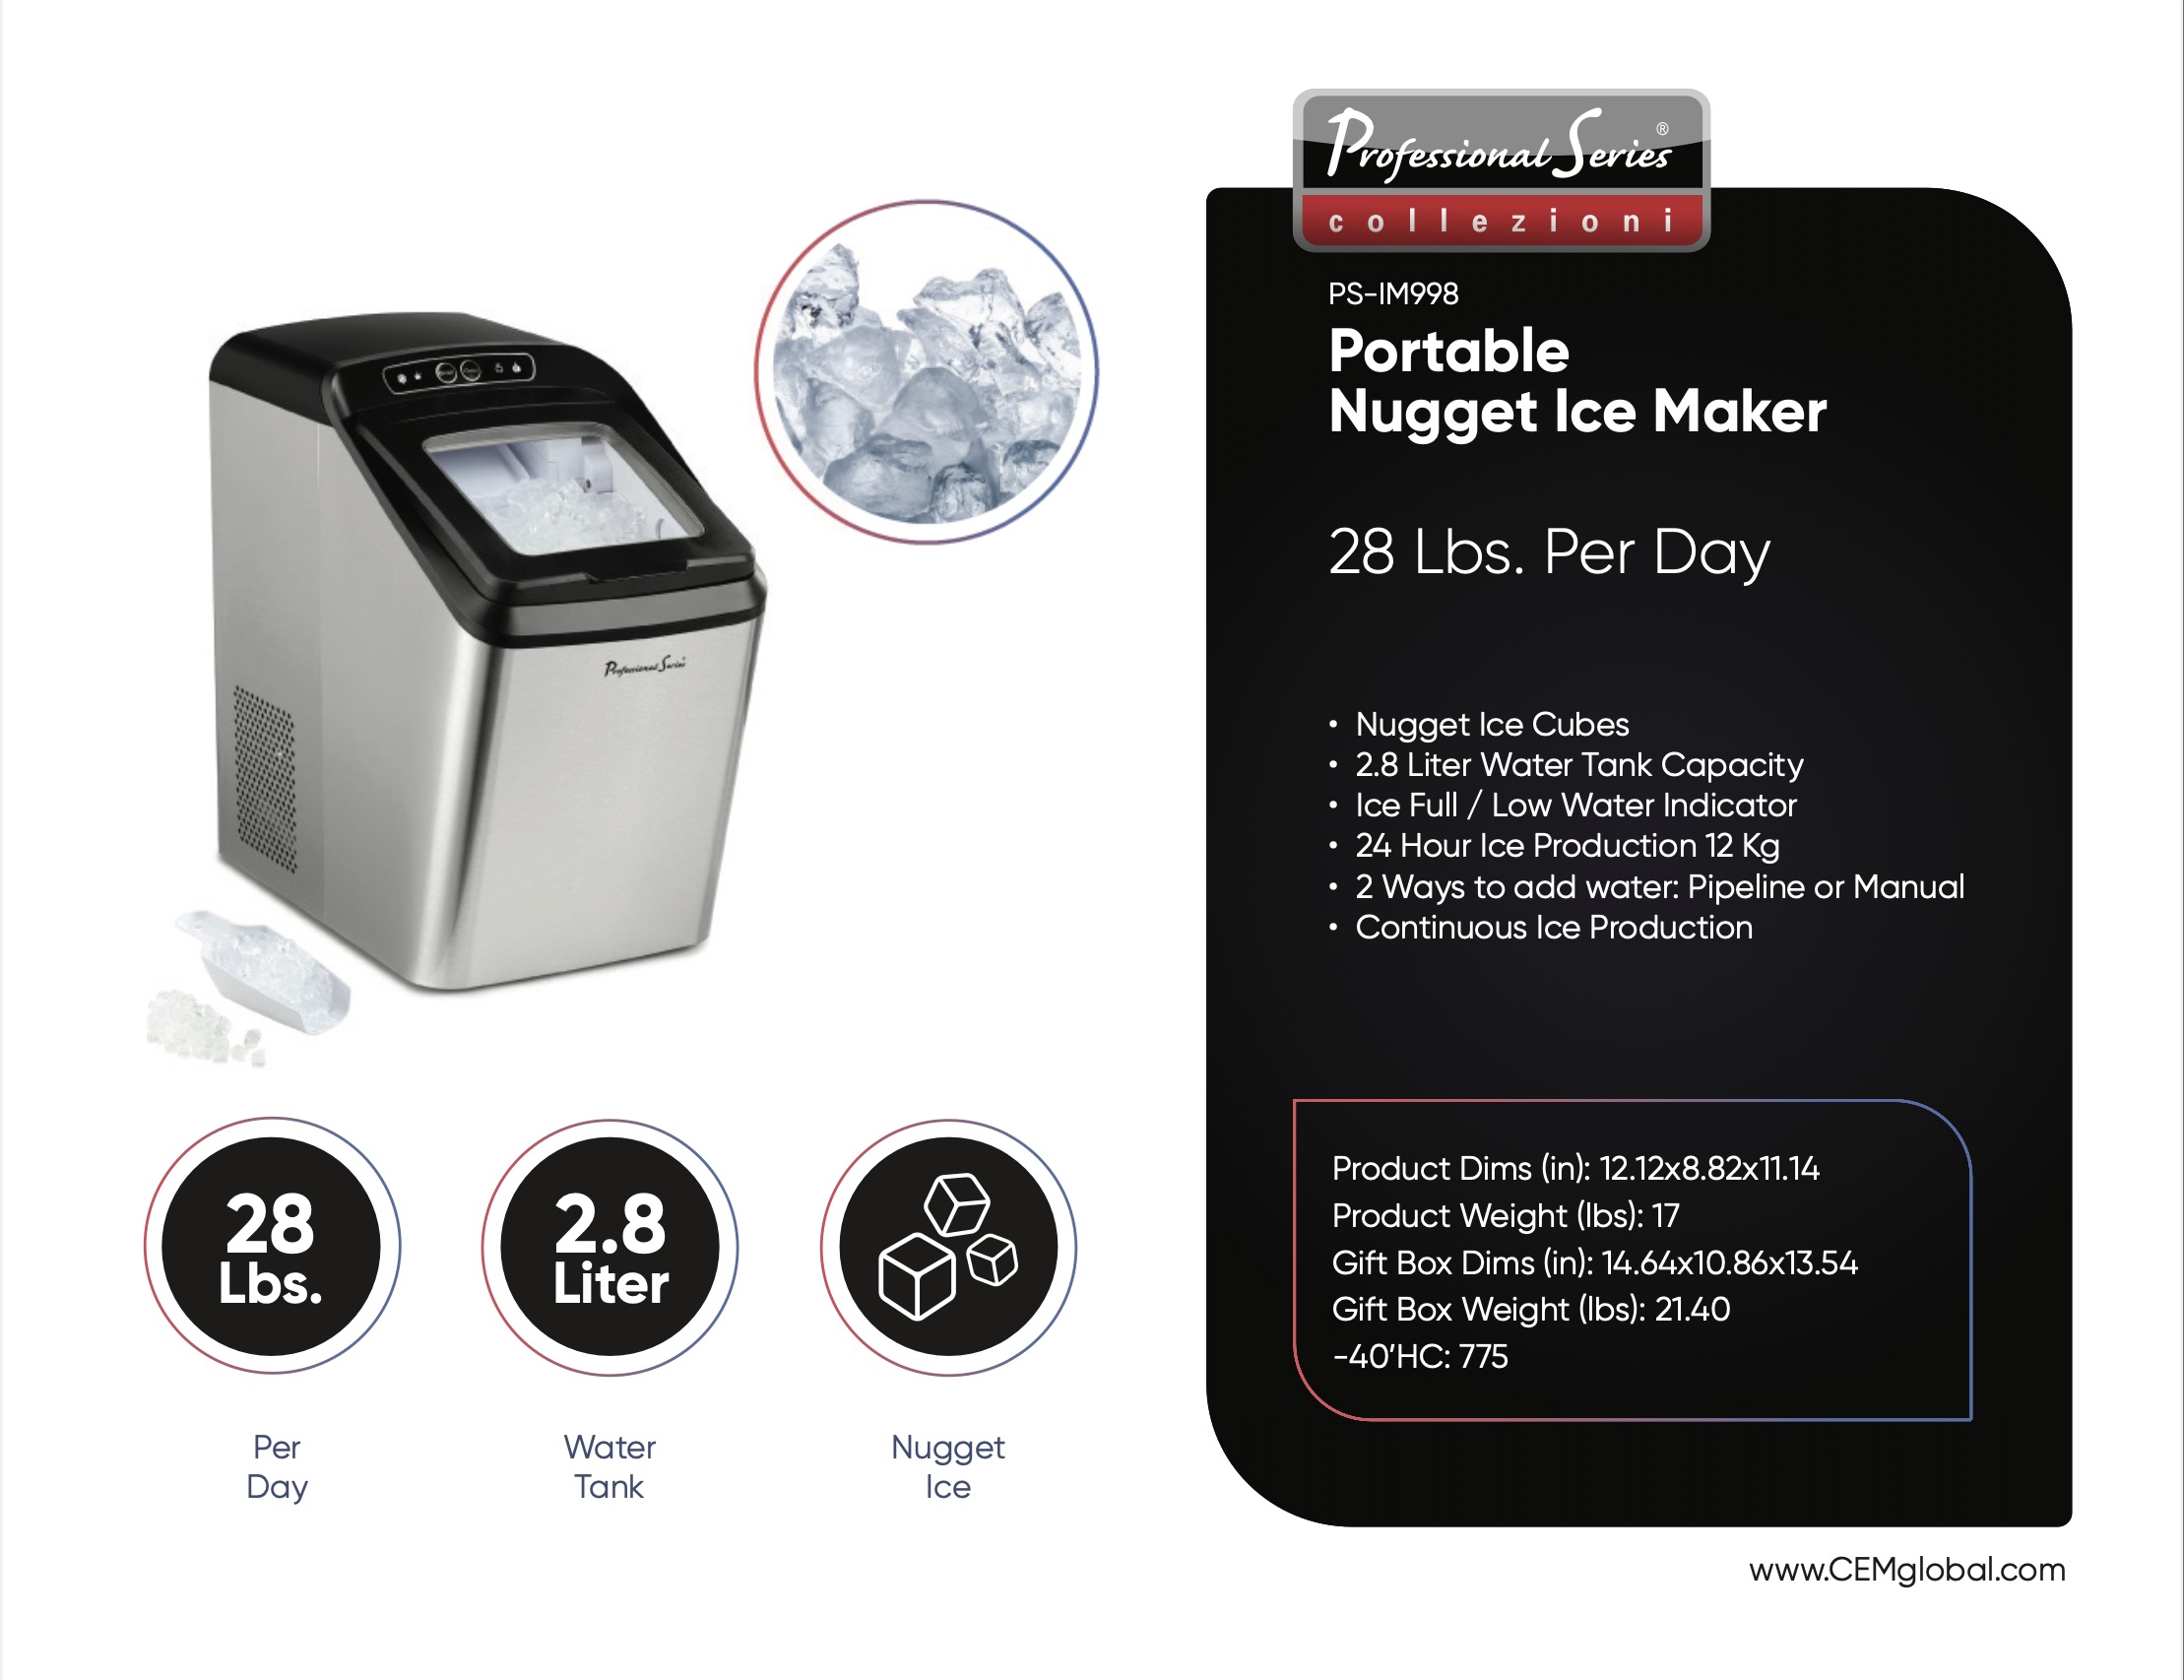 Portable Nugget Ice Maker 28 Lbs.